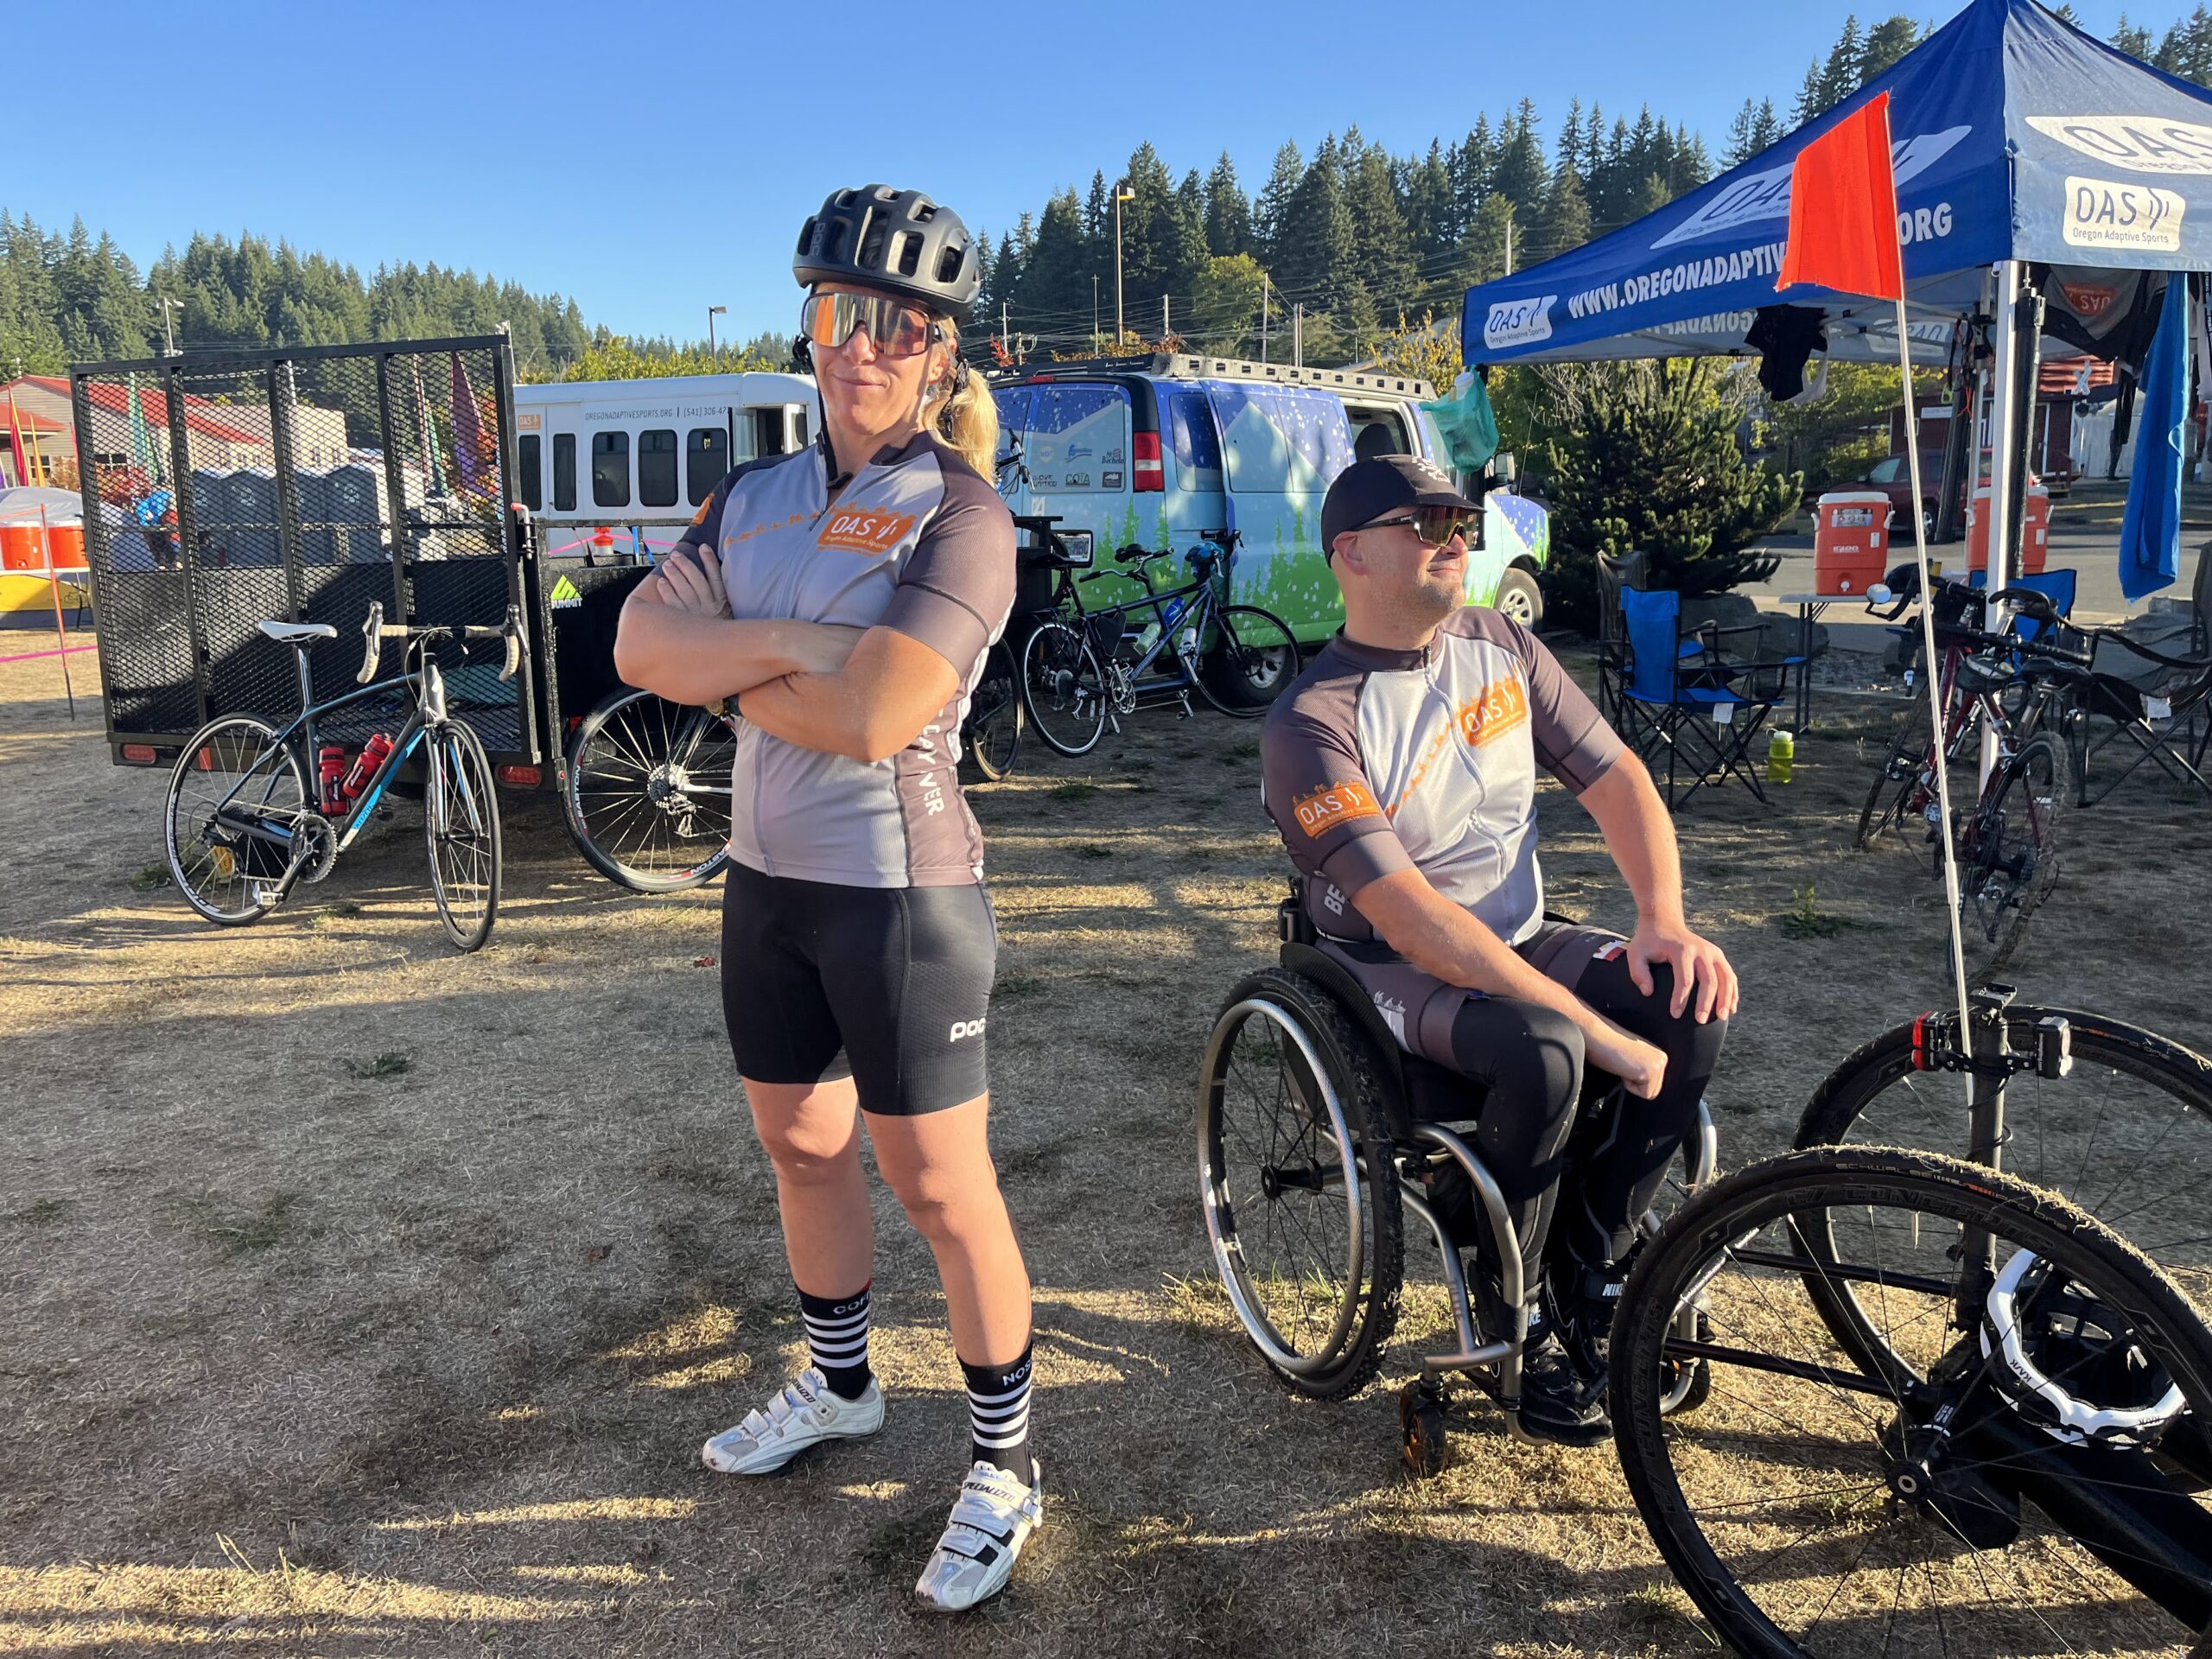 Start of the day, OAS bus and booth are in the background with two members of the OAS cycle team in front doing a power pose for the camera with each looking off to opposite sides and backs facing each other. One is an OAS Staff and another is an adaptive athlete.